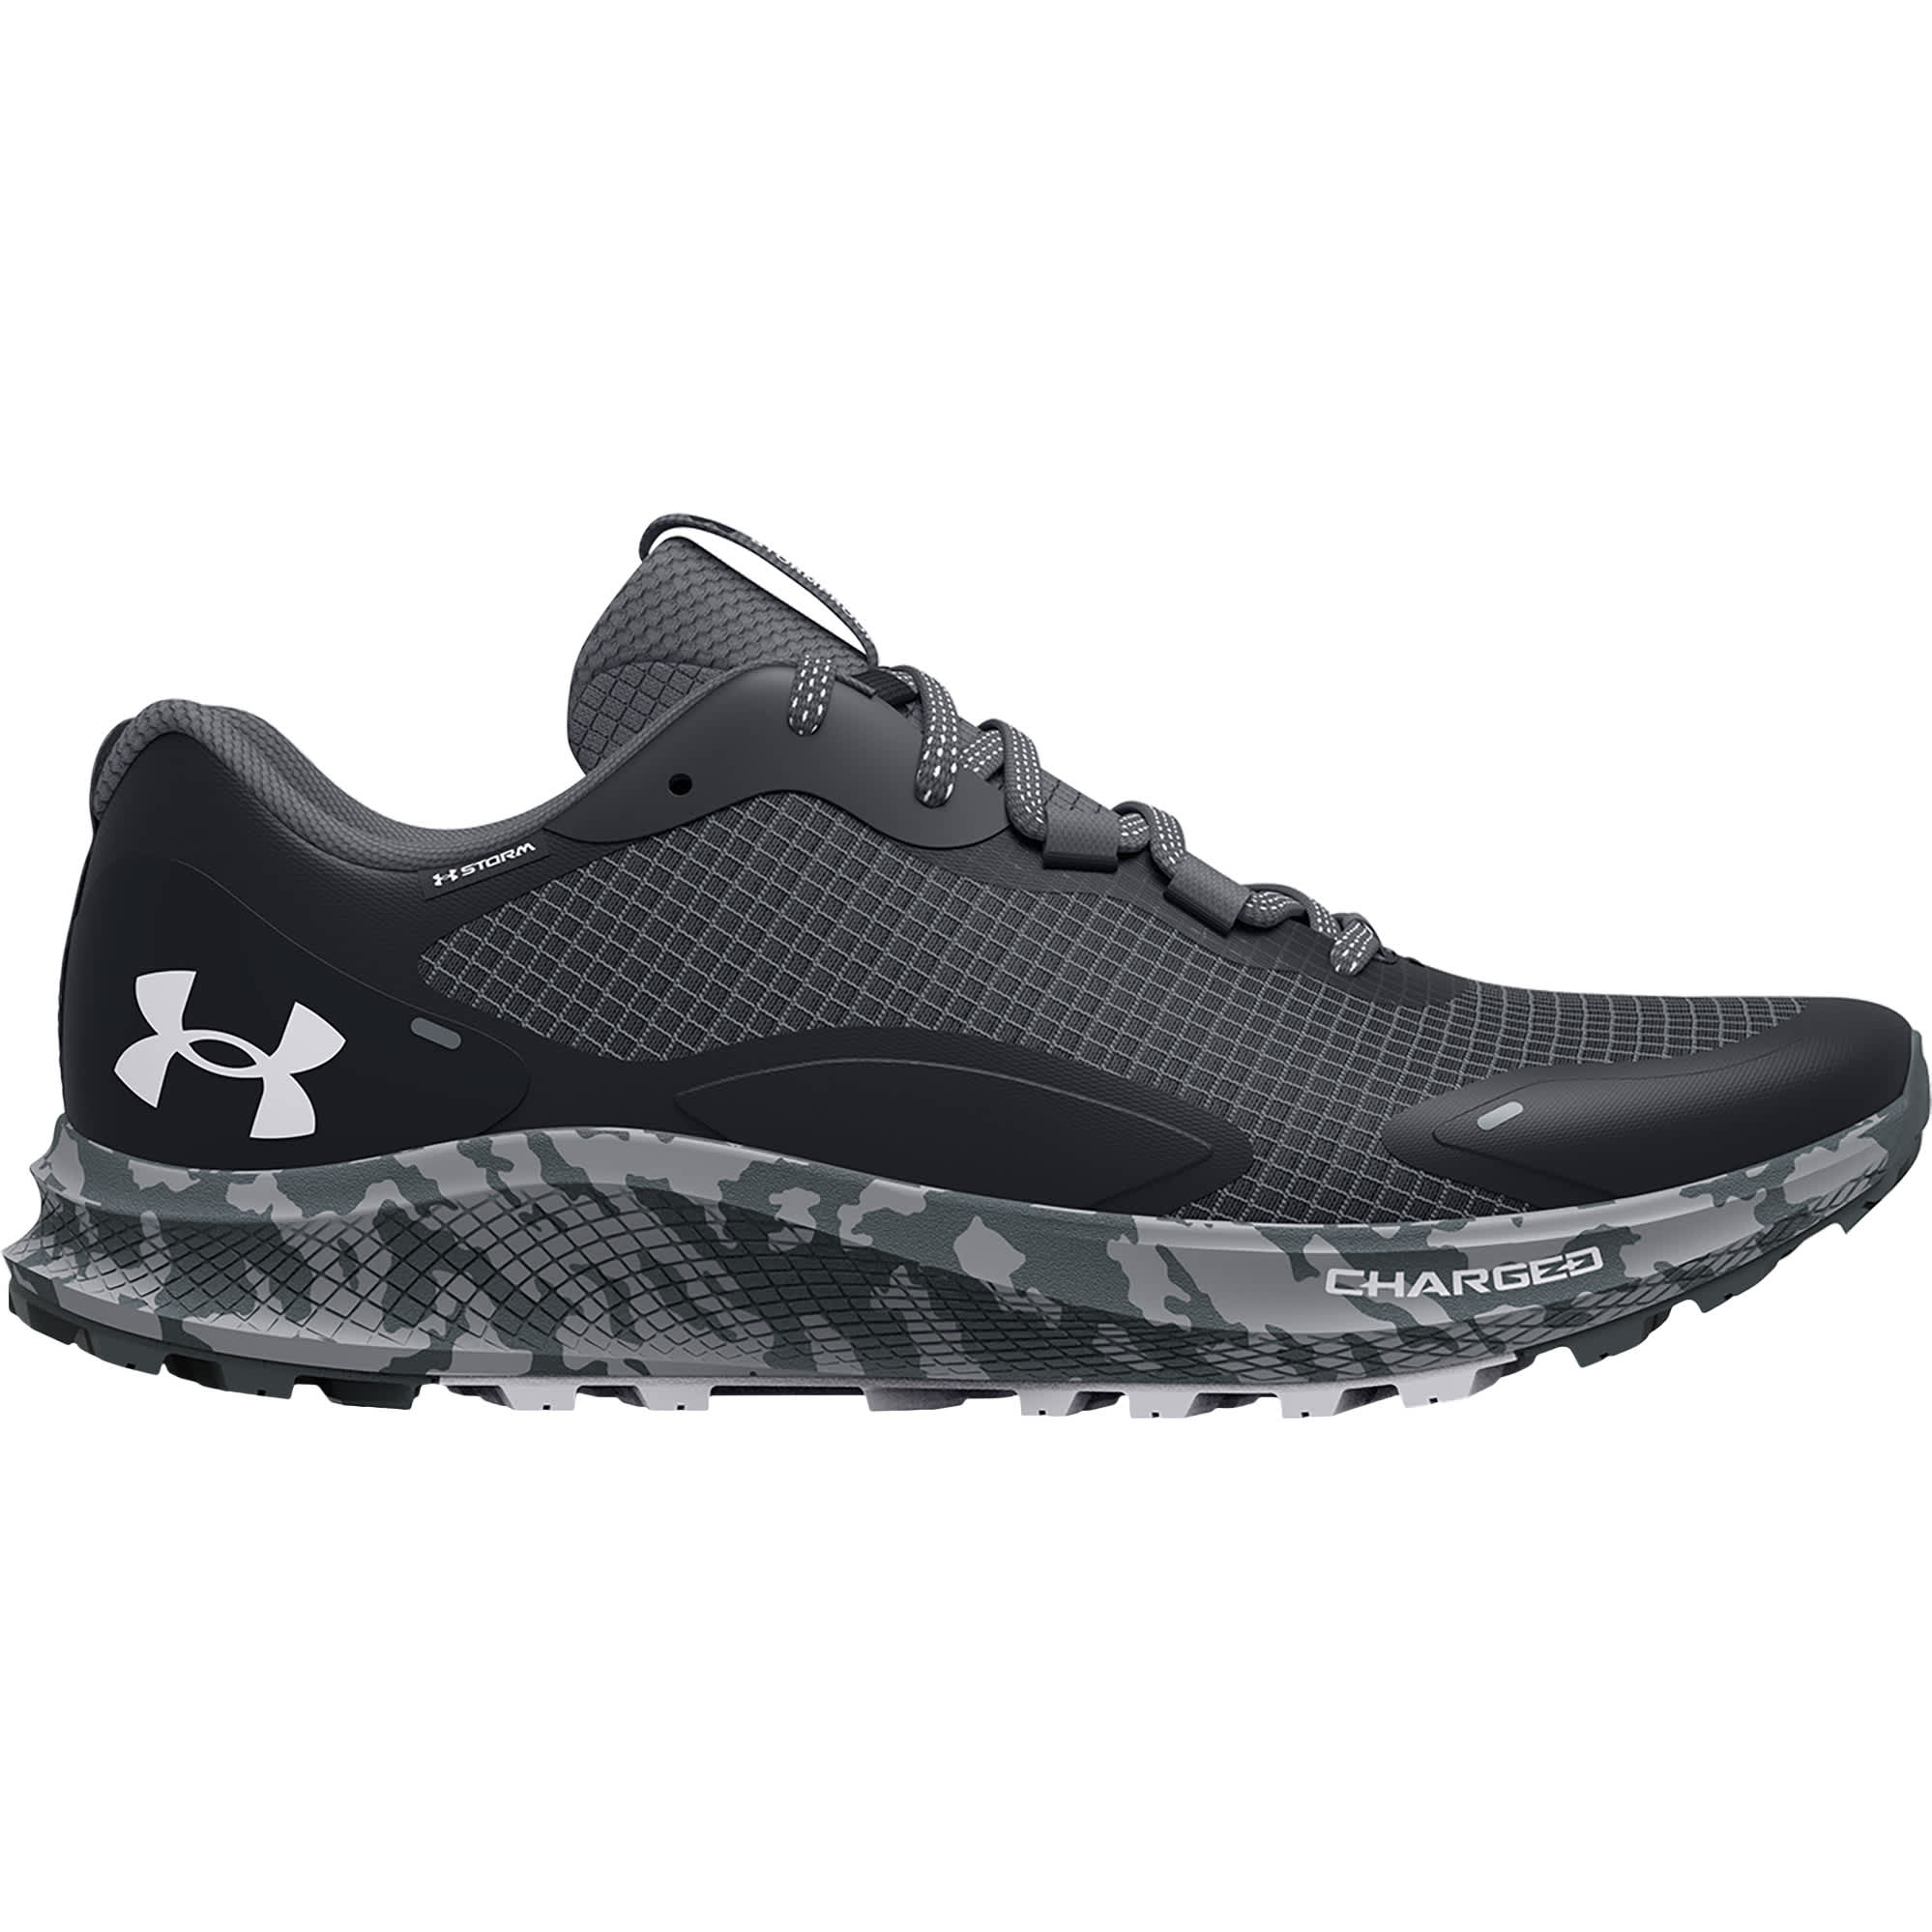 Under Armour Men's Micro G Strikefast Protect Tactical Shoes